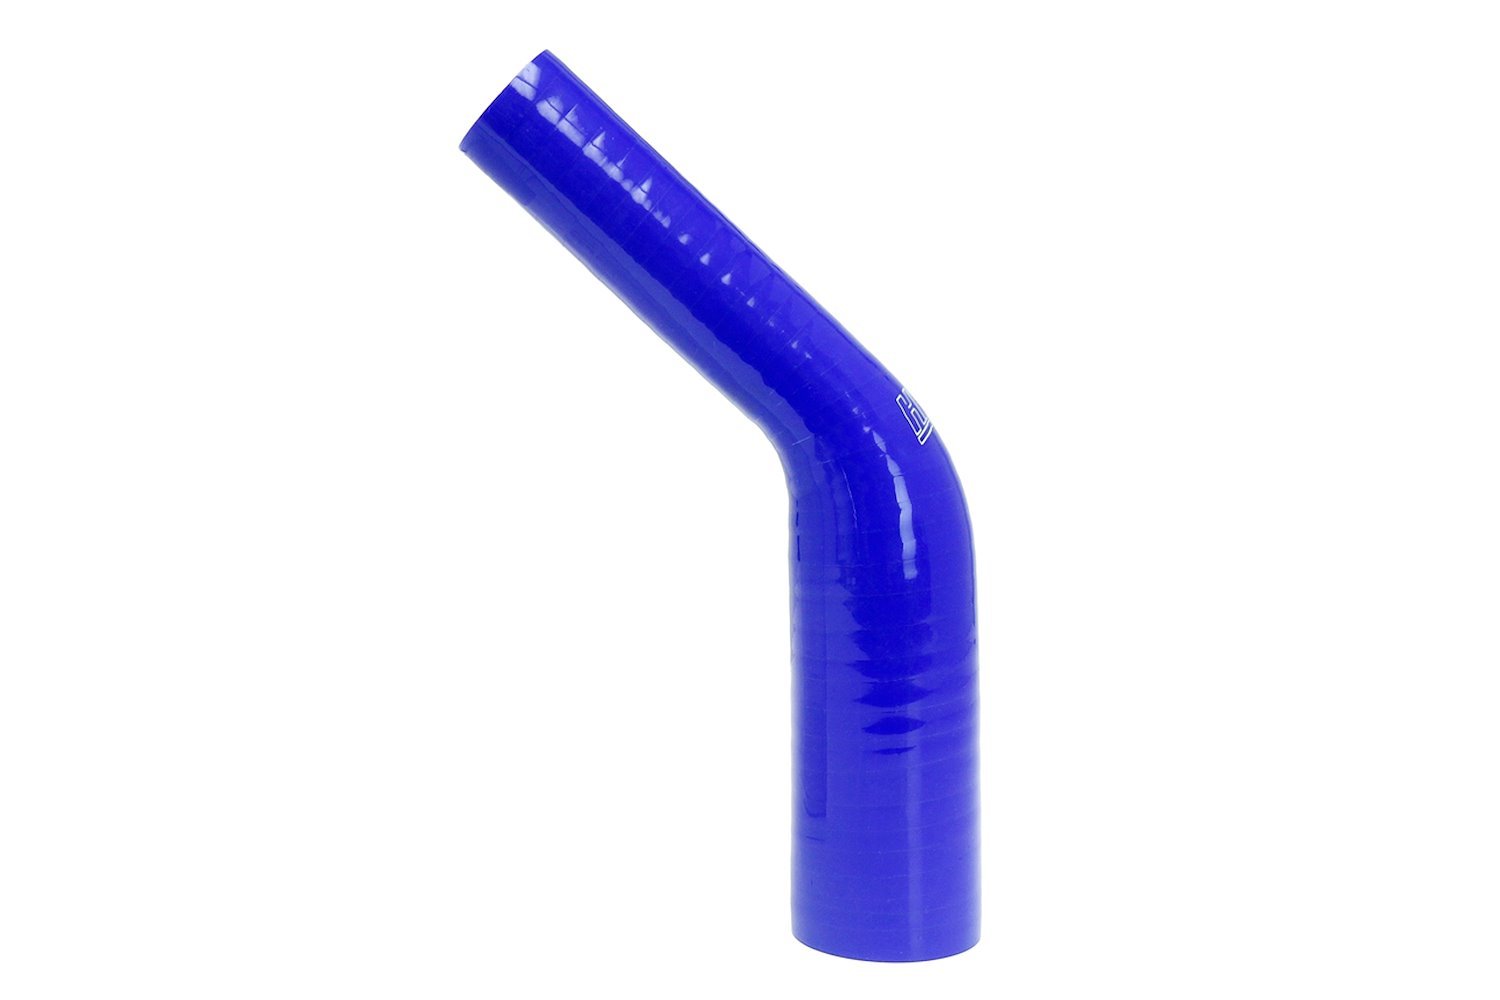 HTSER45-075-125-BLUE Silicone 45-Degree Elbow Hose, High-Temp 4-Ply Reinforced, 3/4 in. - 1-1/4 in. ID, Blue